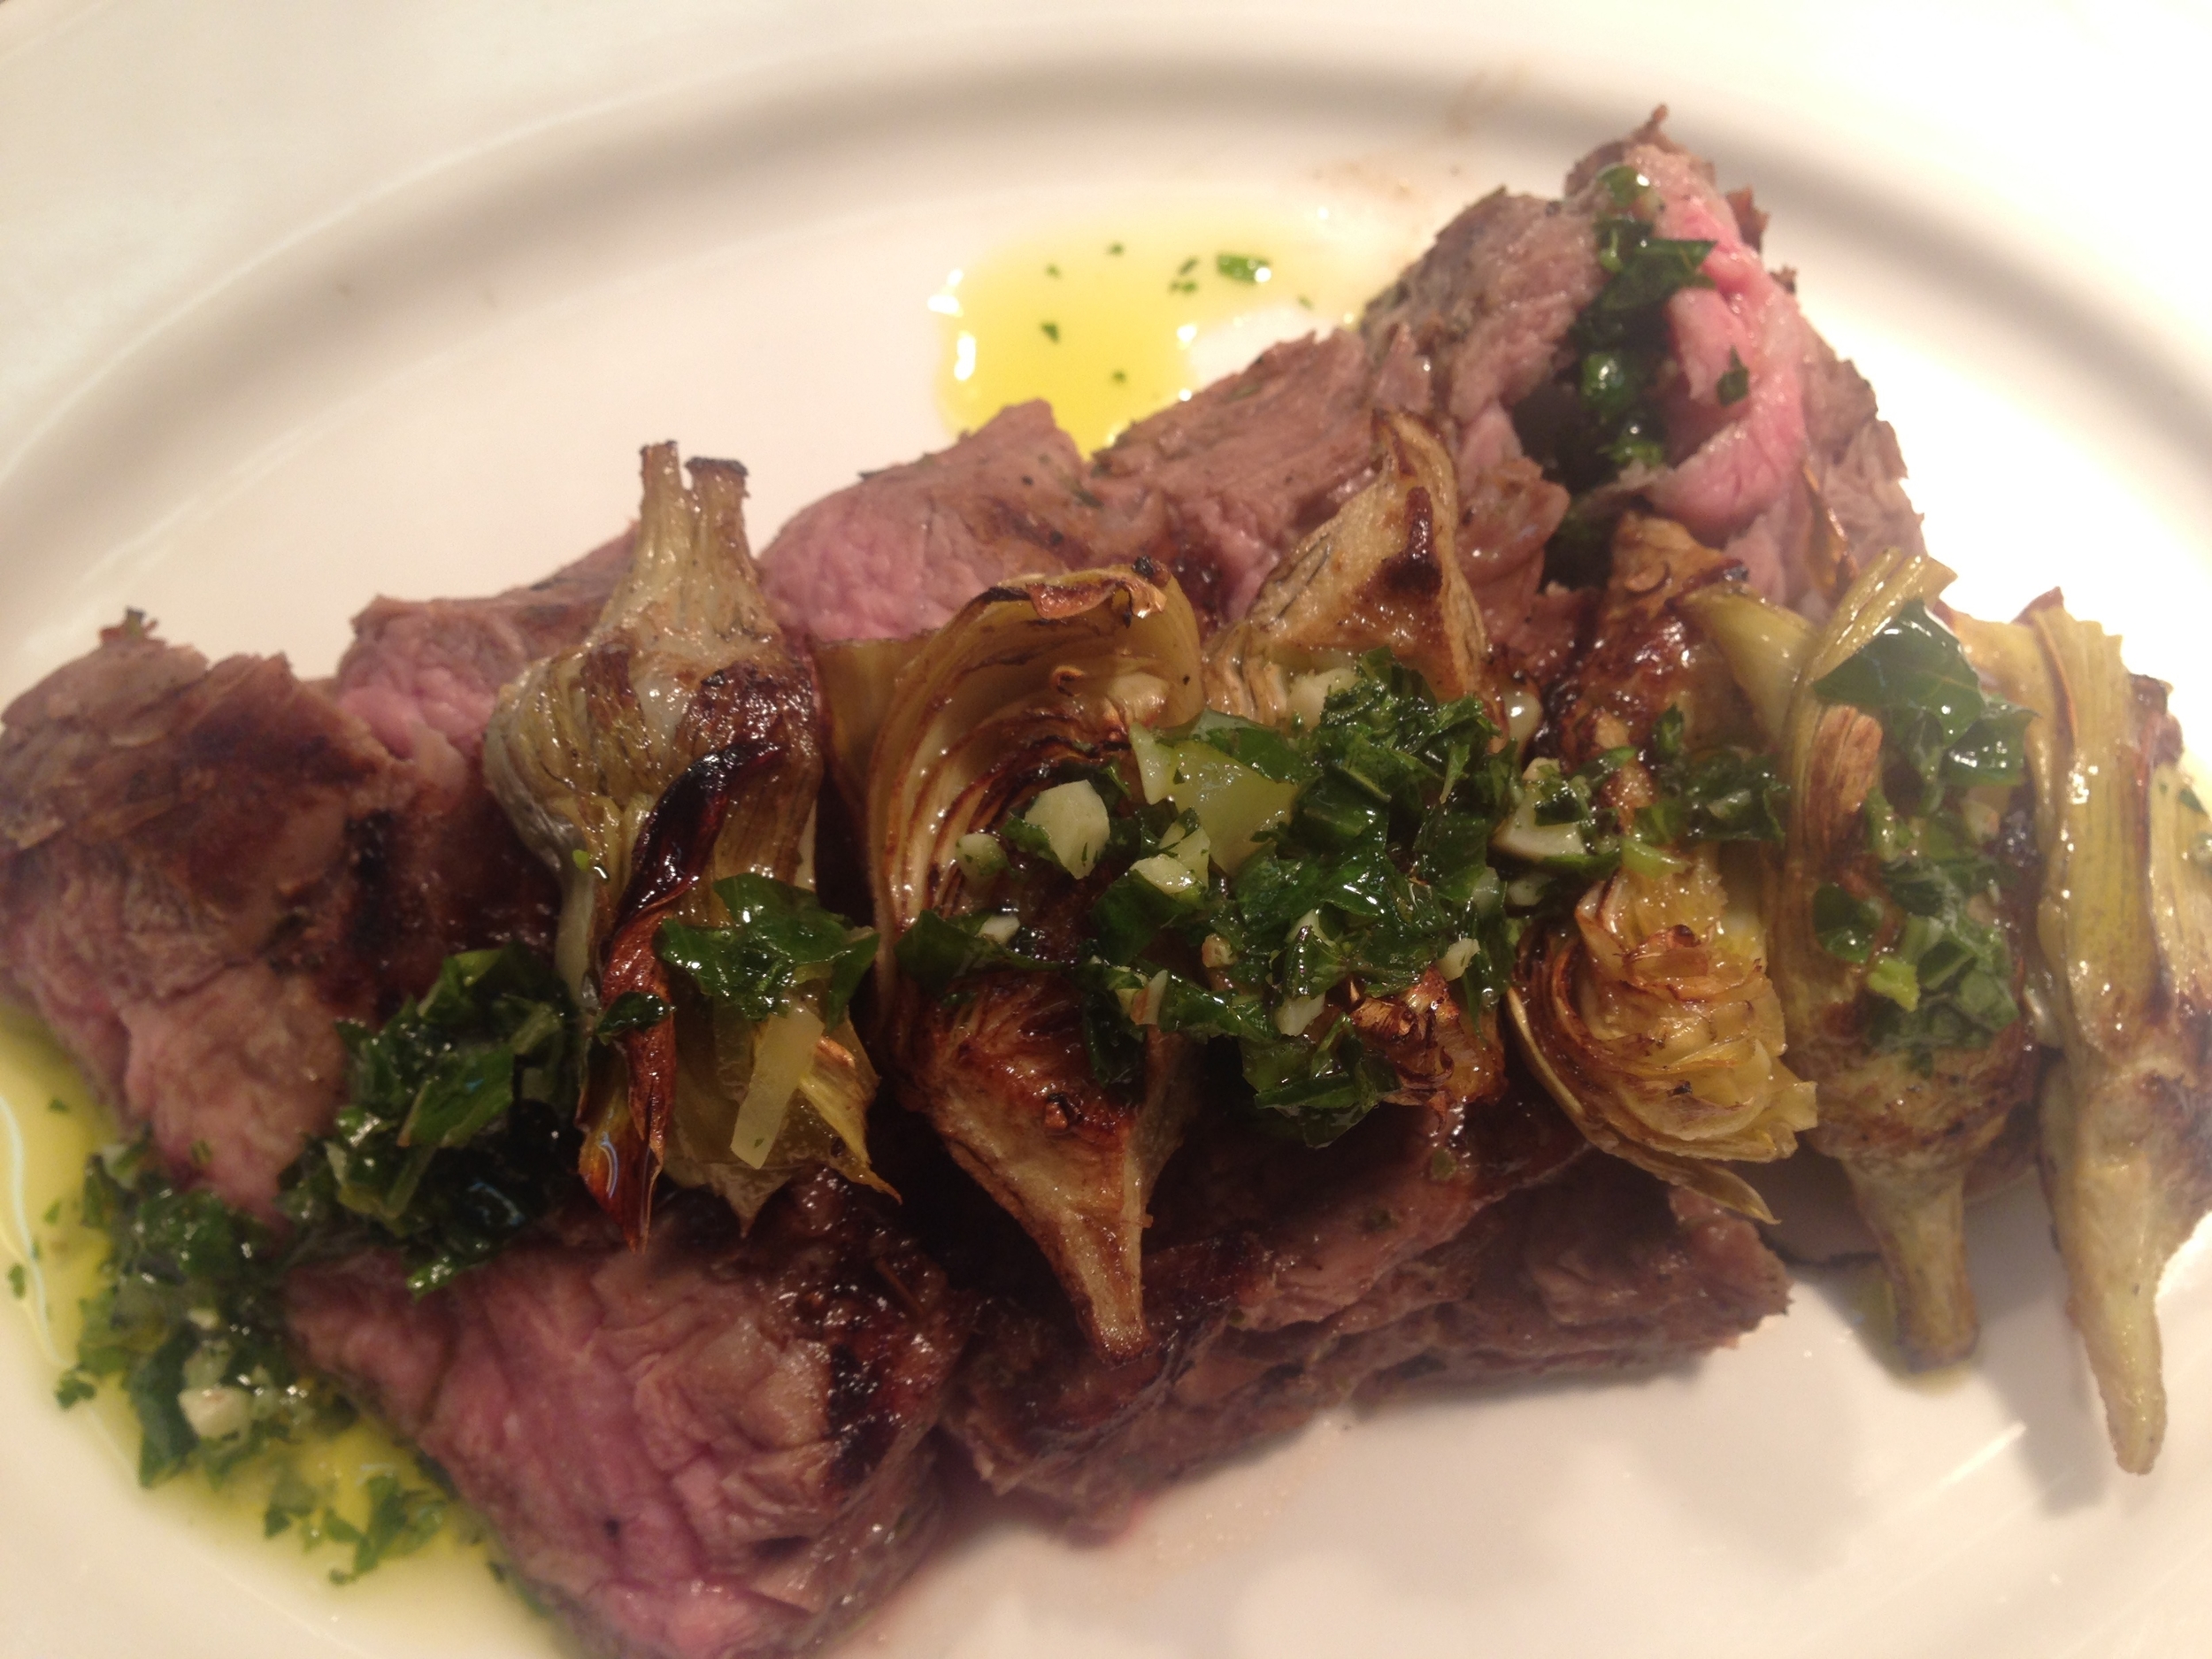 Hanger Steak with Artichokes and Chimichurri